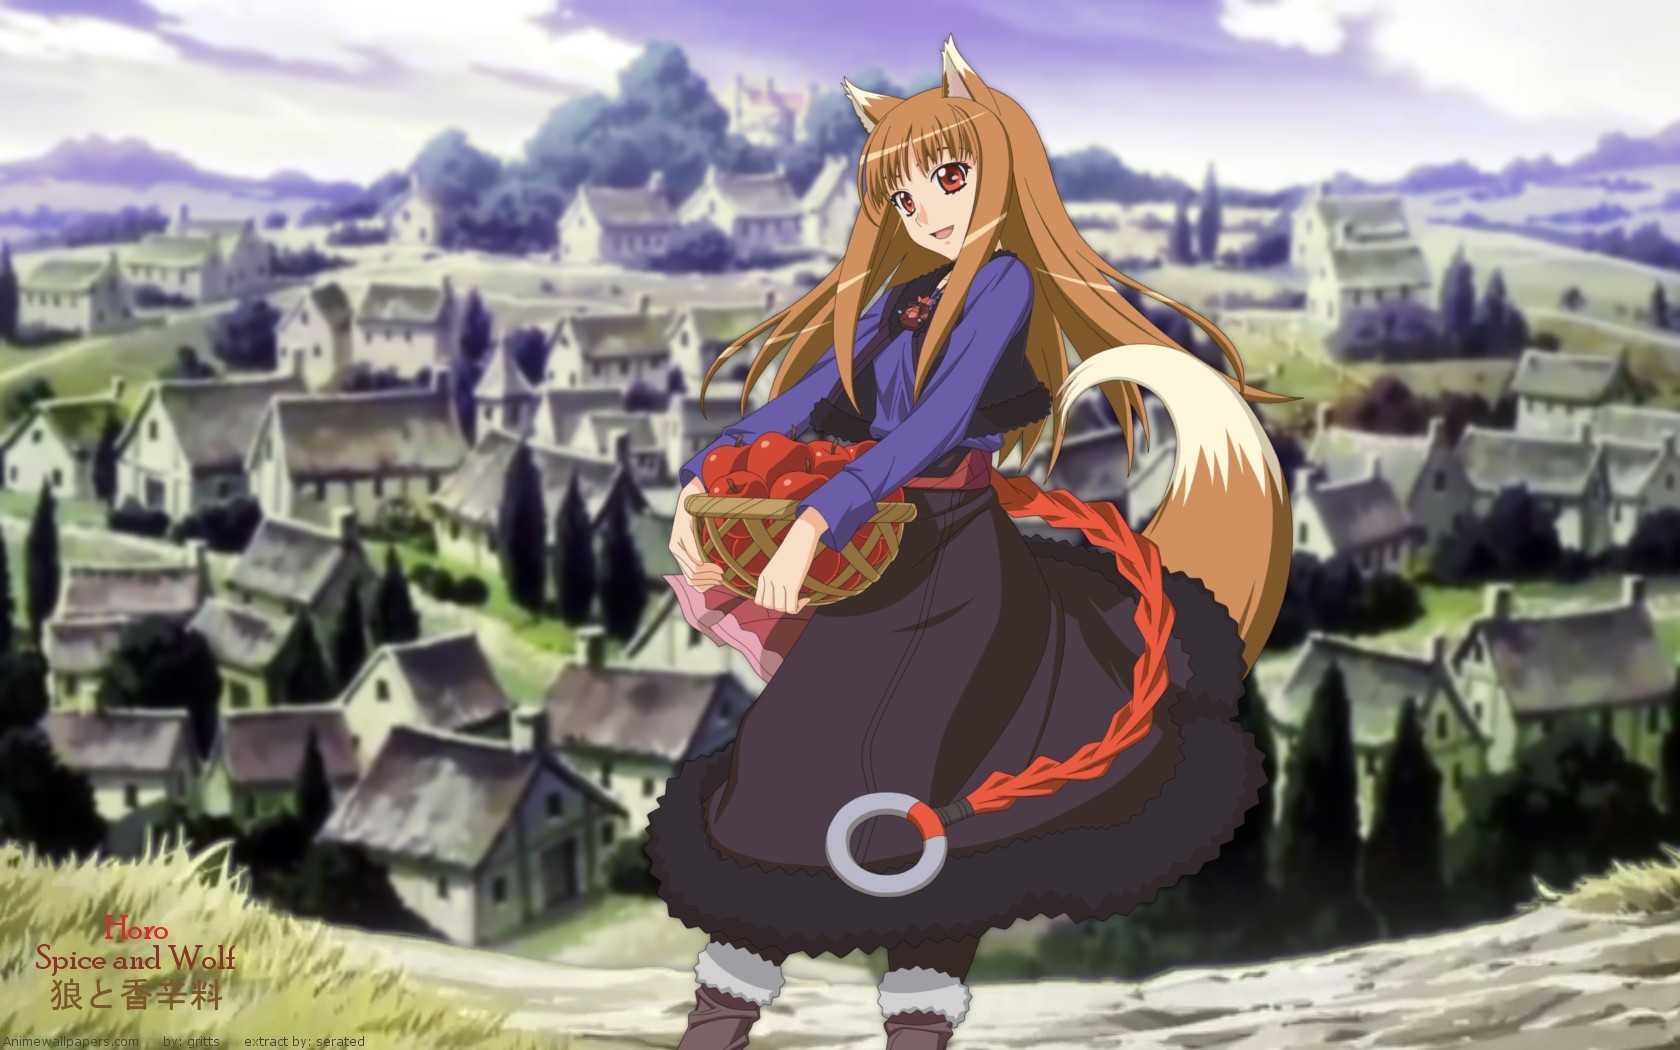 Anime 1680x1050 Spice and Wolf Holo (Spice and Wolf) anime anime girls wolf girls fantasy art fantasy girl food fruit baskets apples animal ears tail red eyes brunette long hair